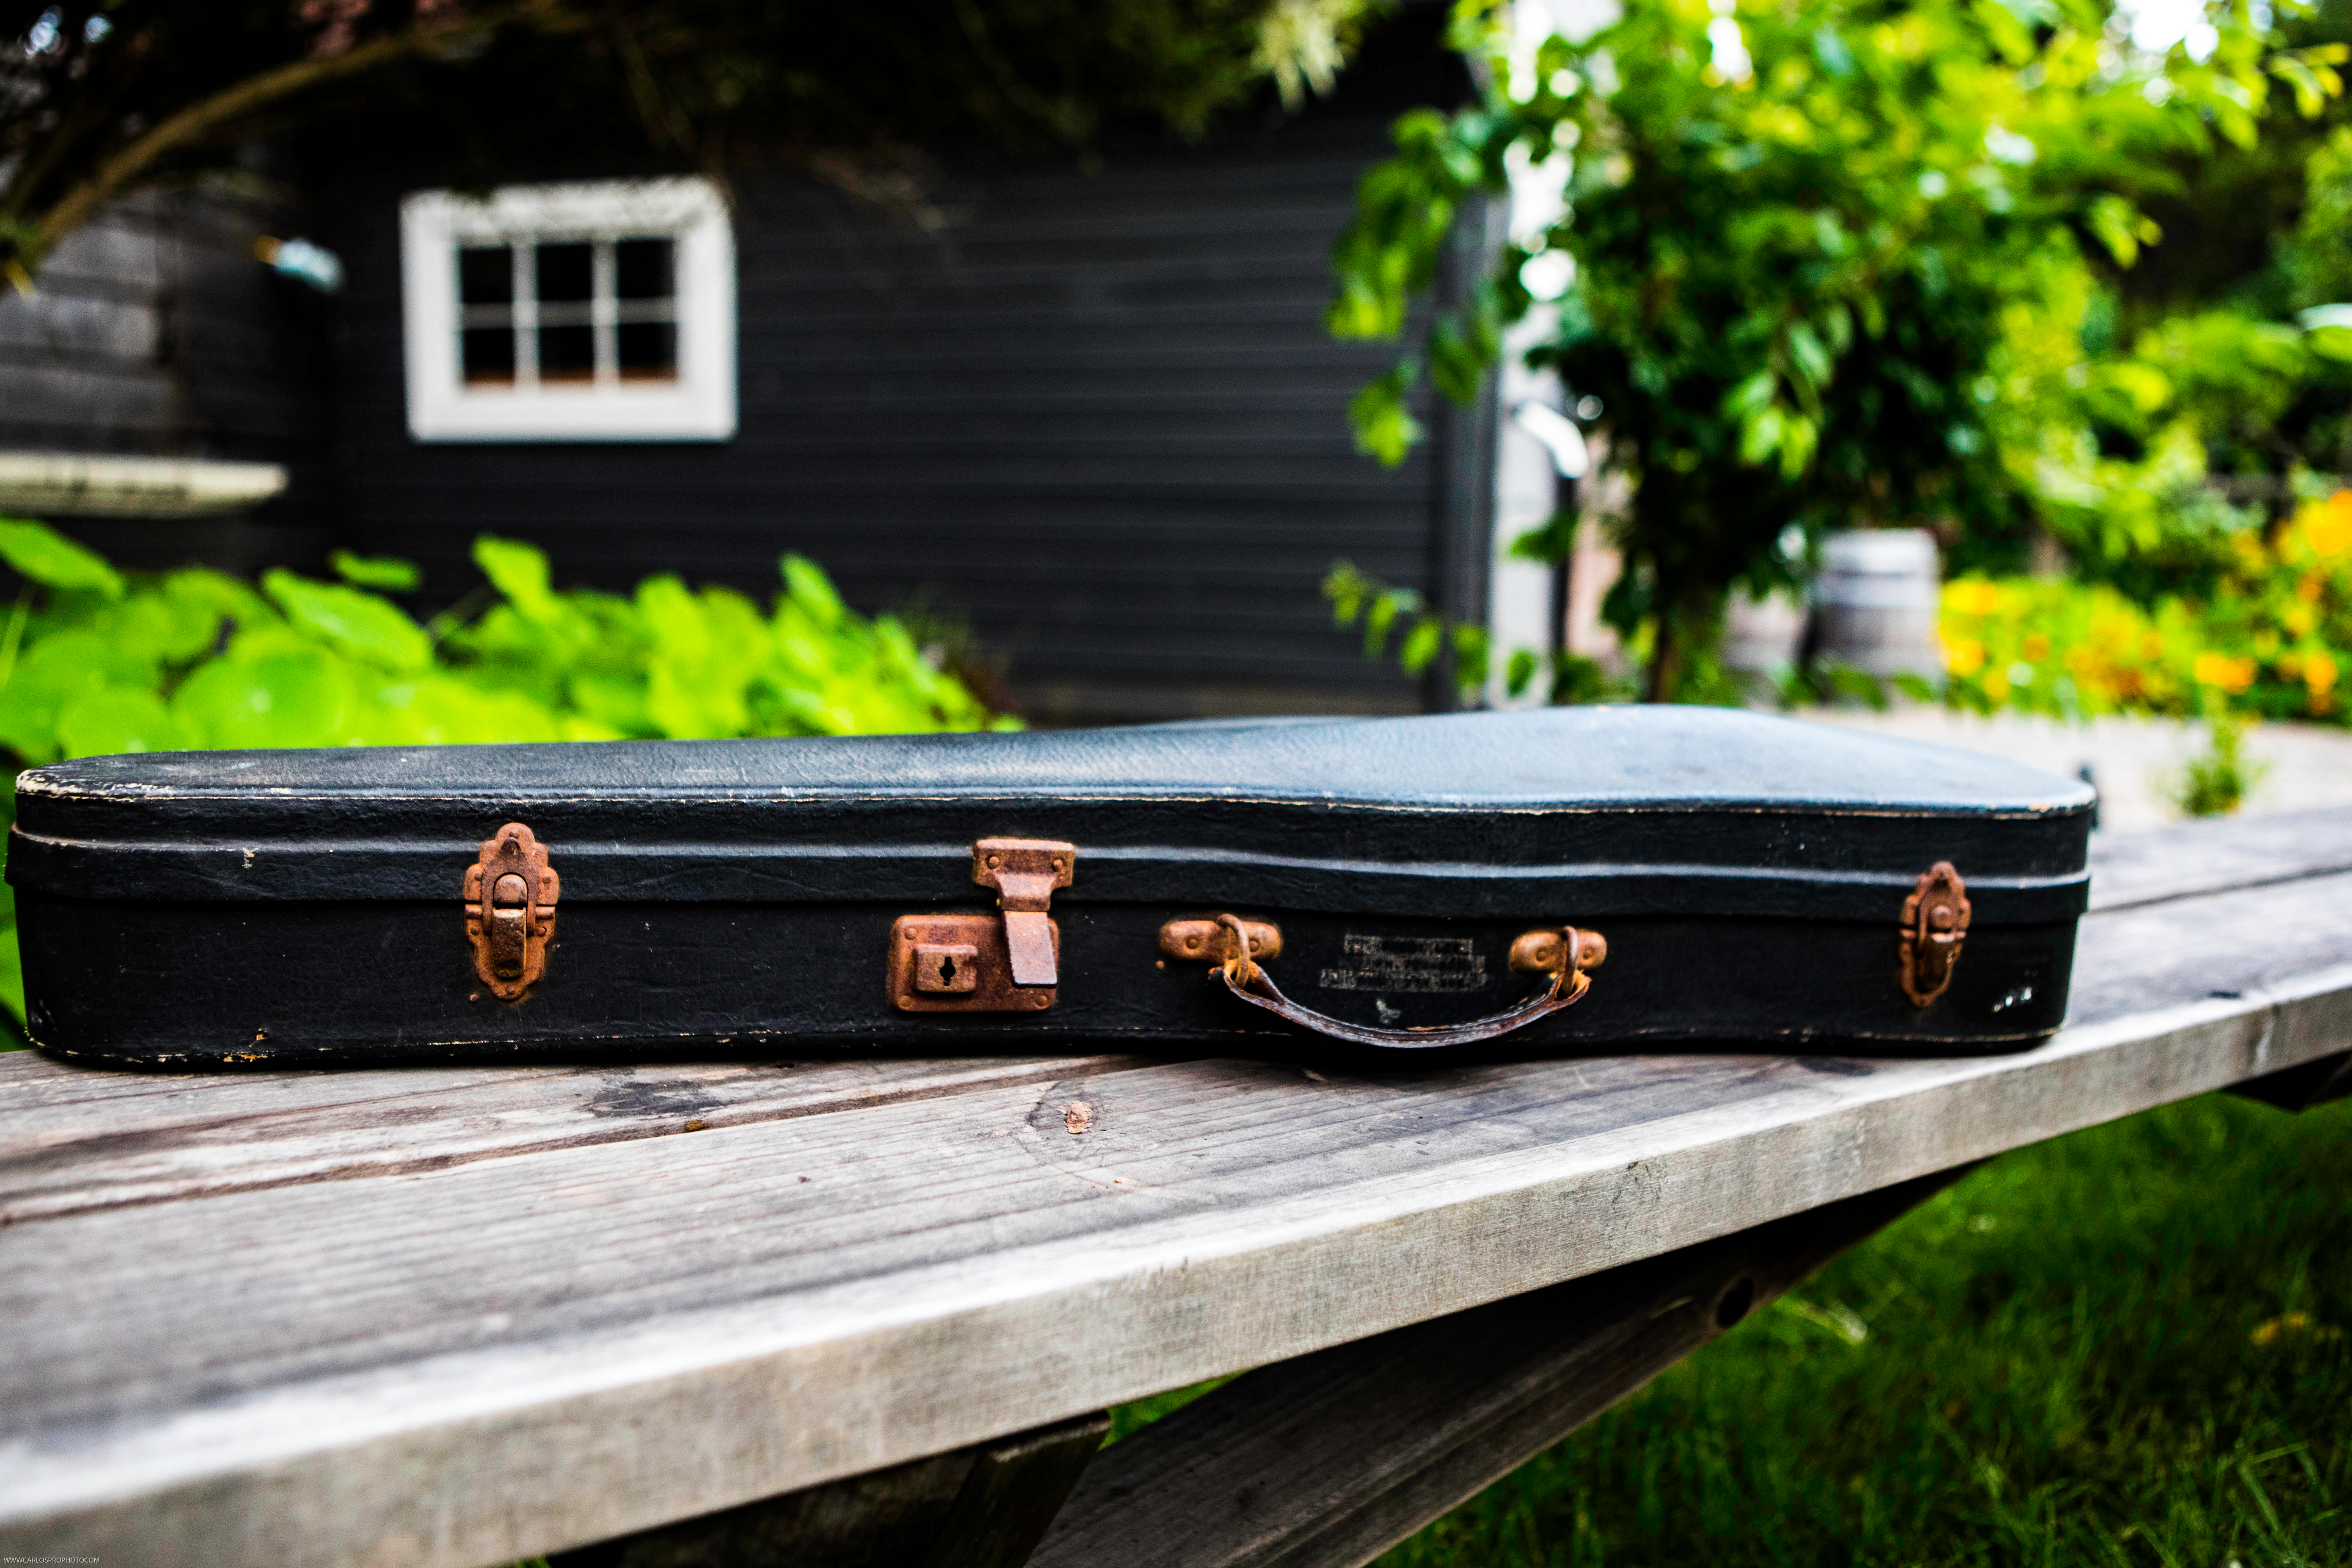 A weathered violin case | Source: Shutterstock